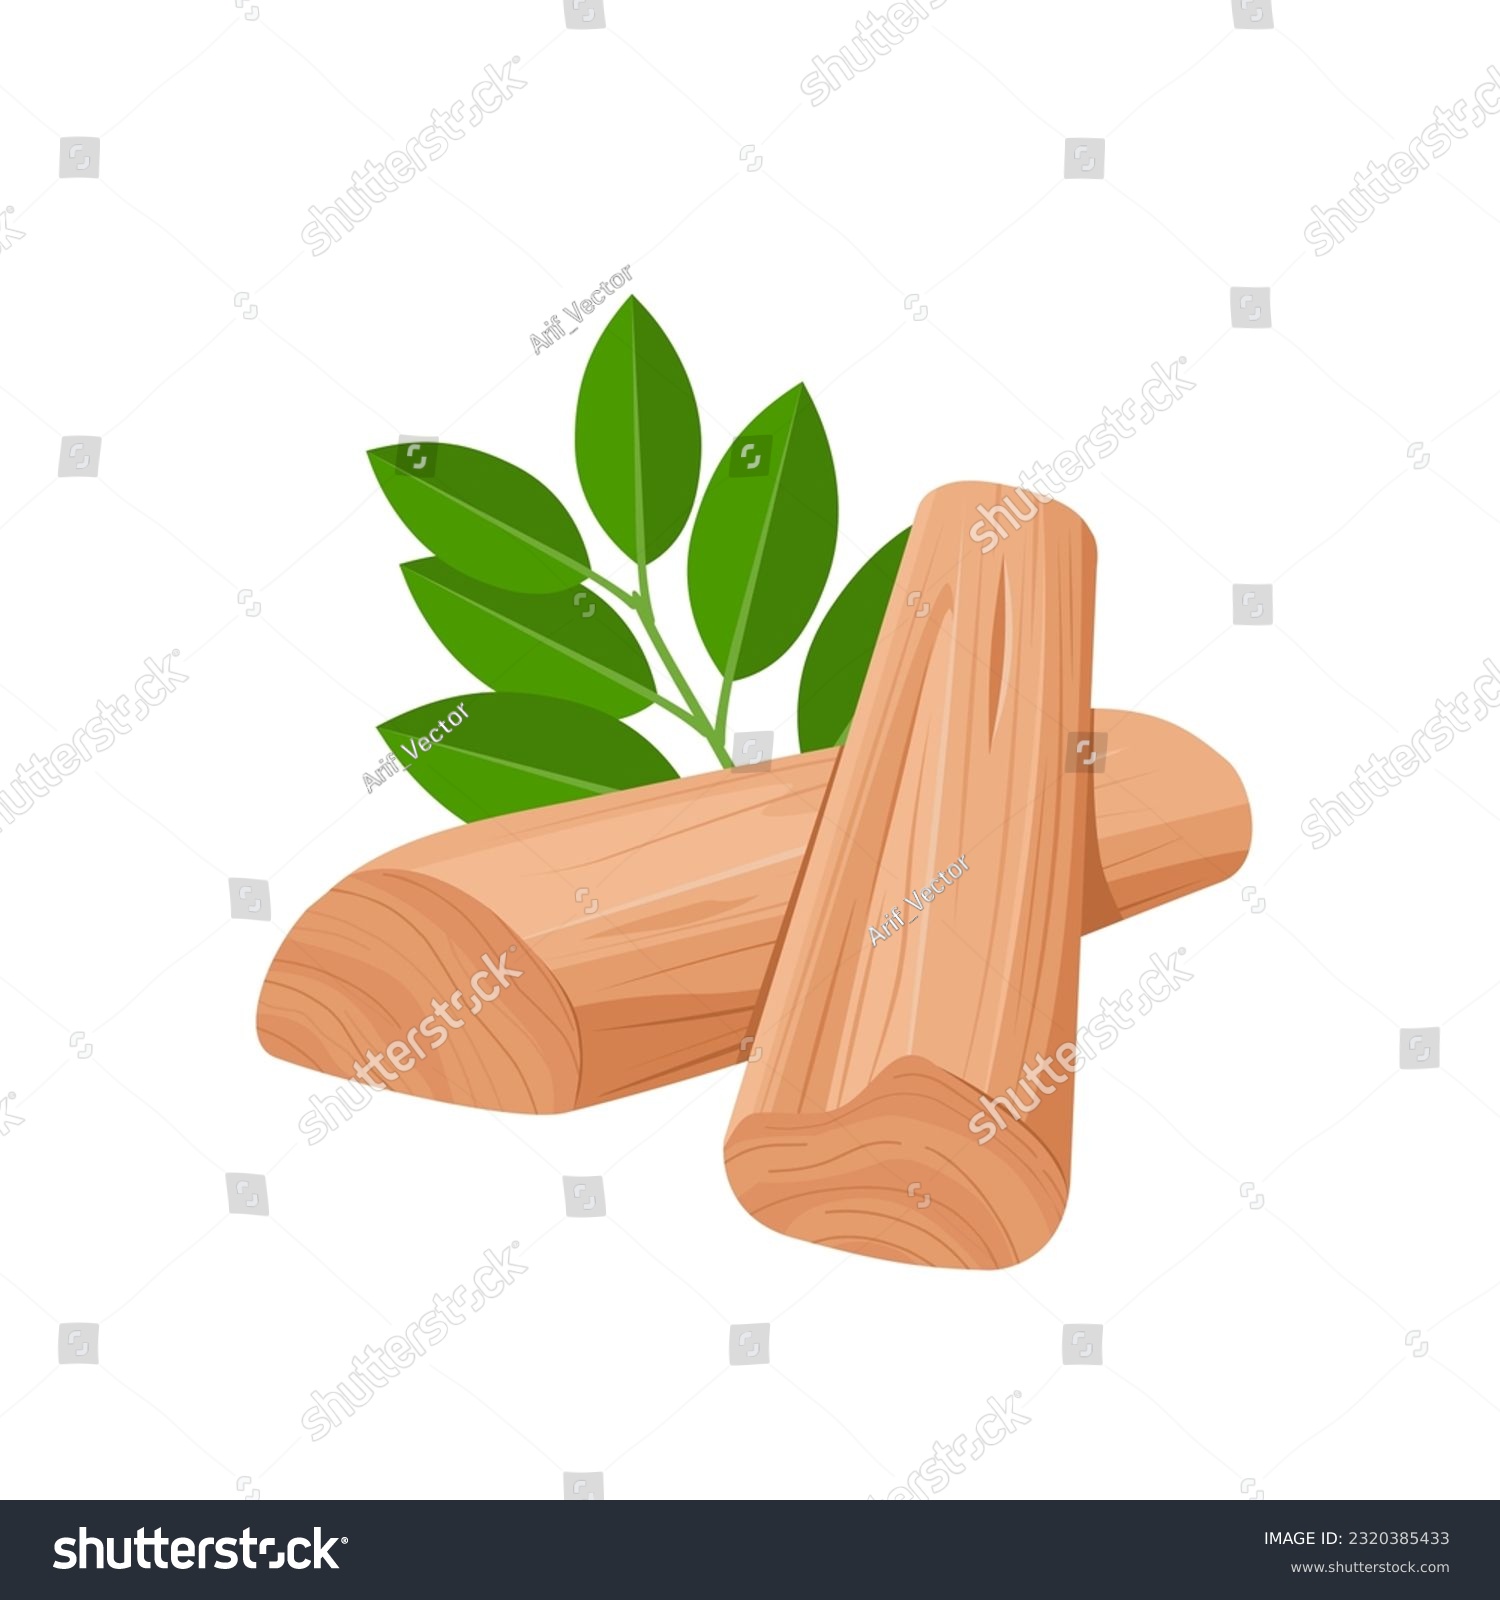 Vector illustration, sandalwood with green leaves, isolated on white background. #2320385433